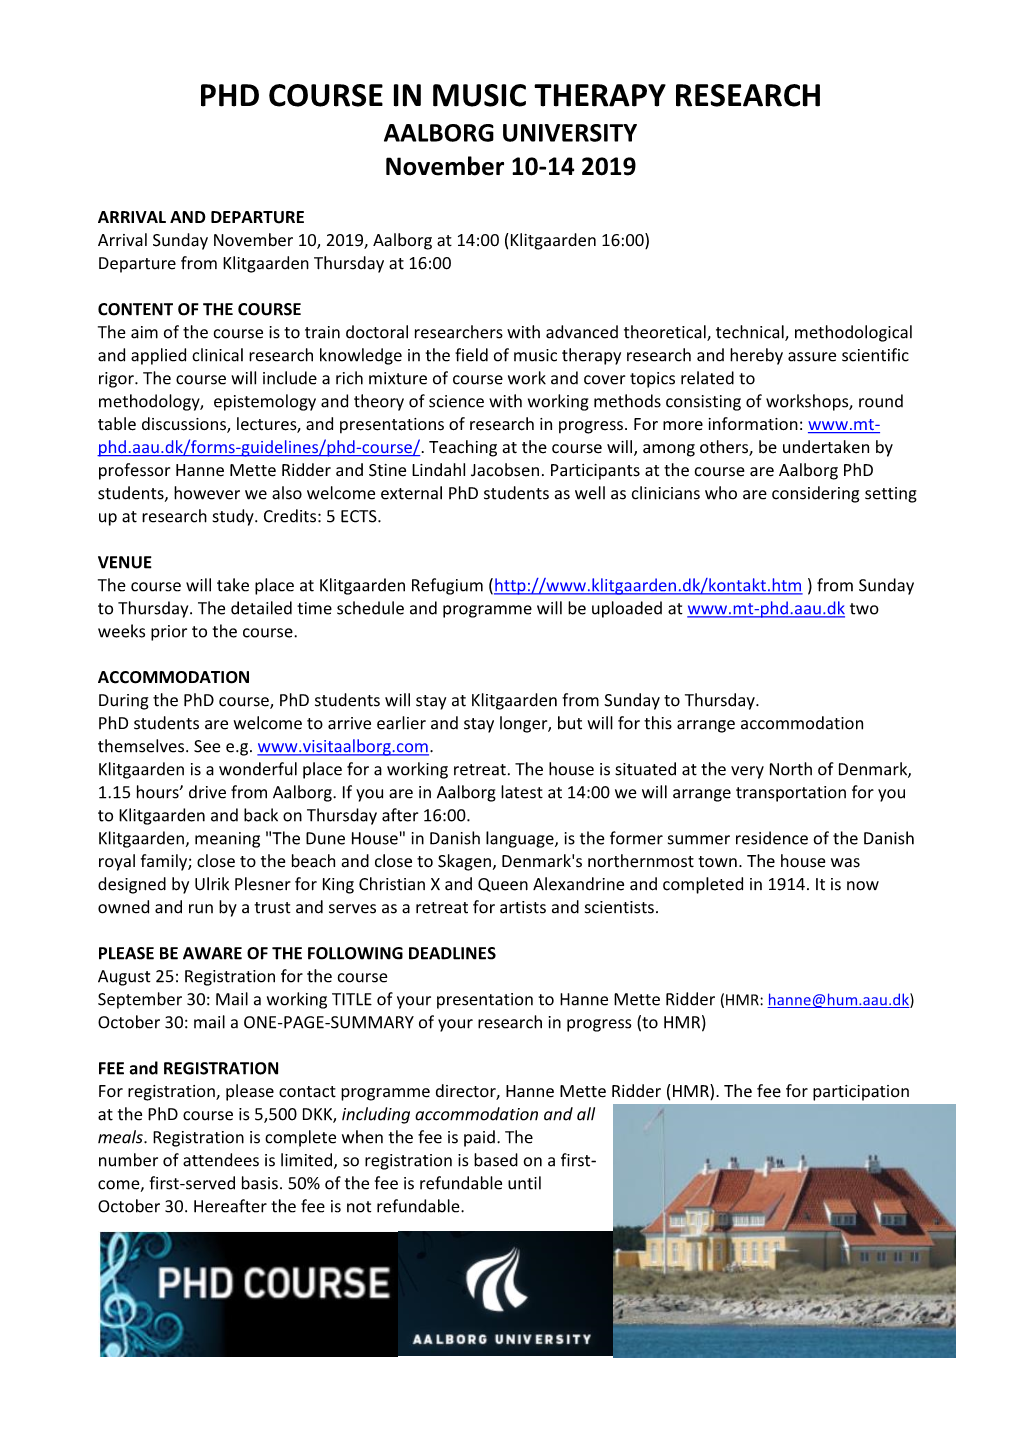 PHD COURSE in MUSIC THERAPY RESEARCH AALBORG UNIVERSITY November 10-14 2019